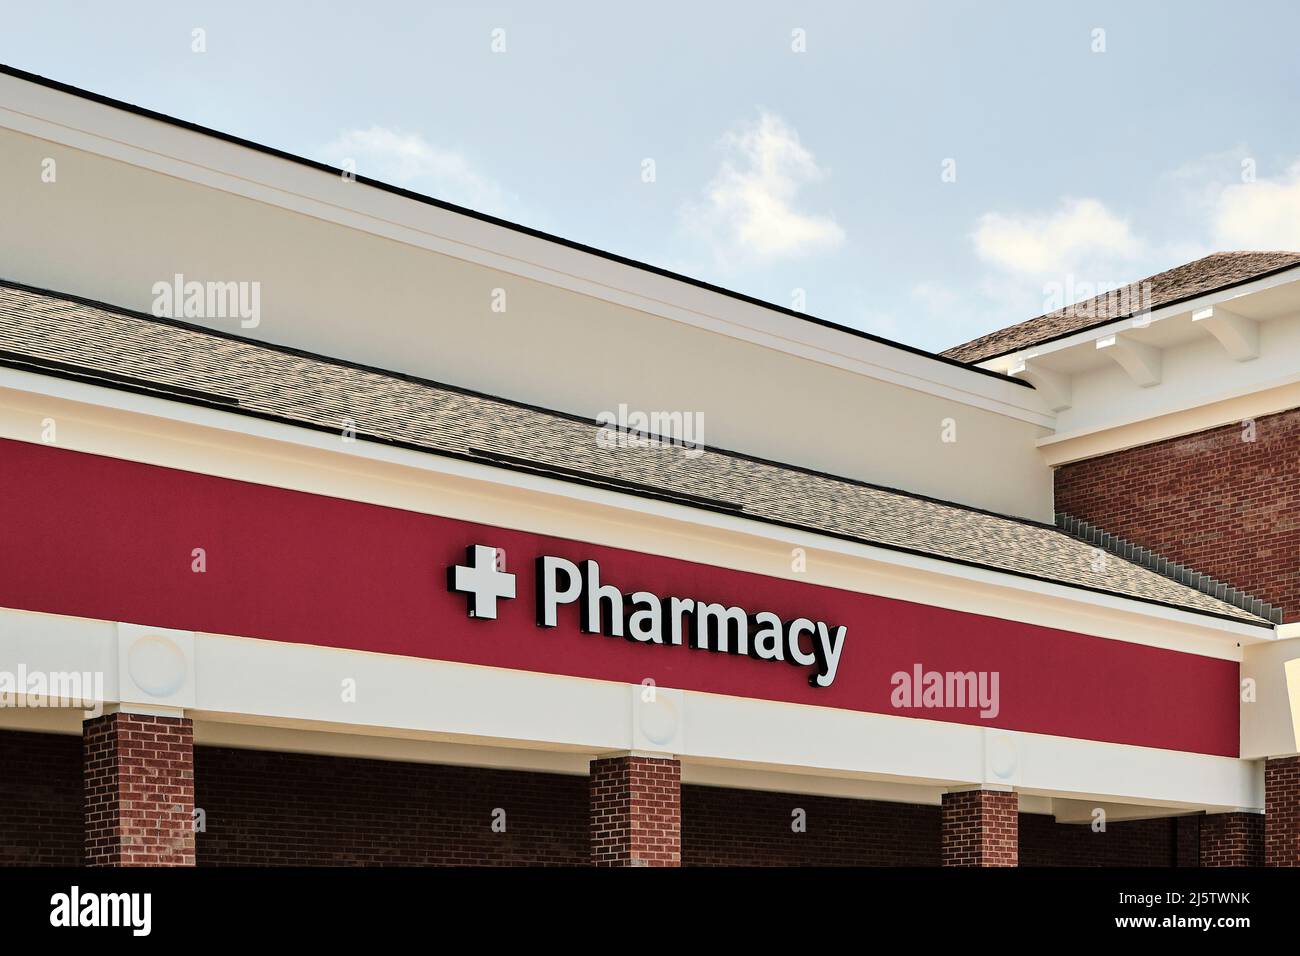 Pharmacy sign or signage for a local pharmacy or drugstore in Montgomery Alabama, USA. Stock Photo